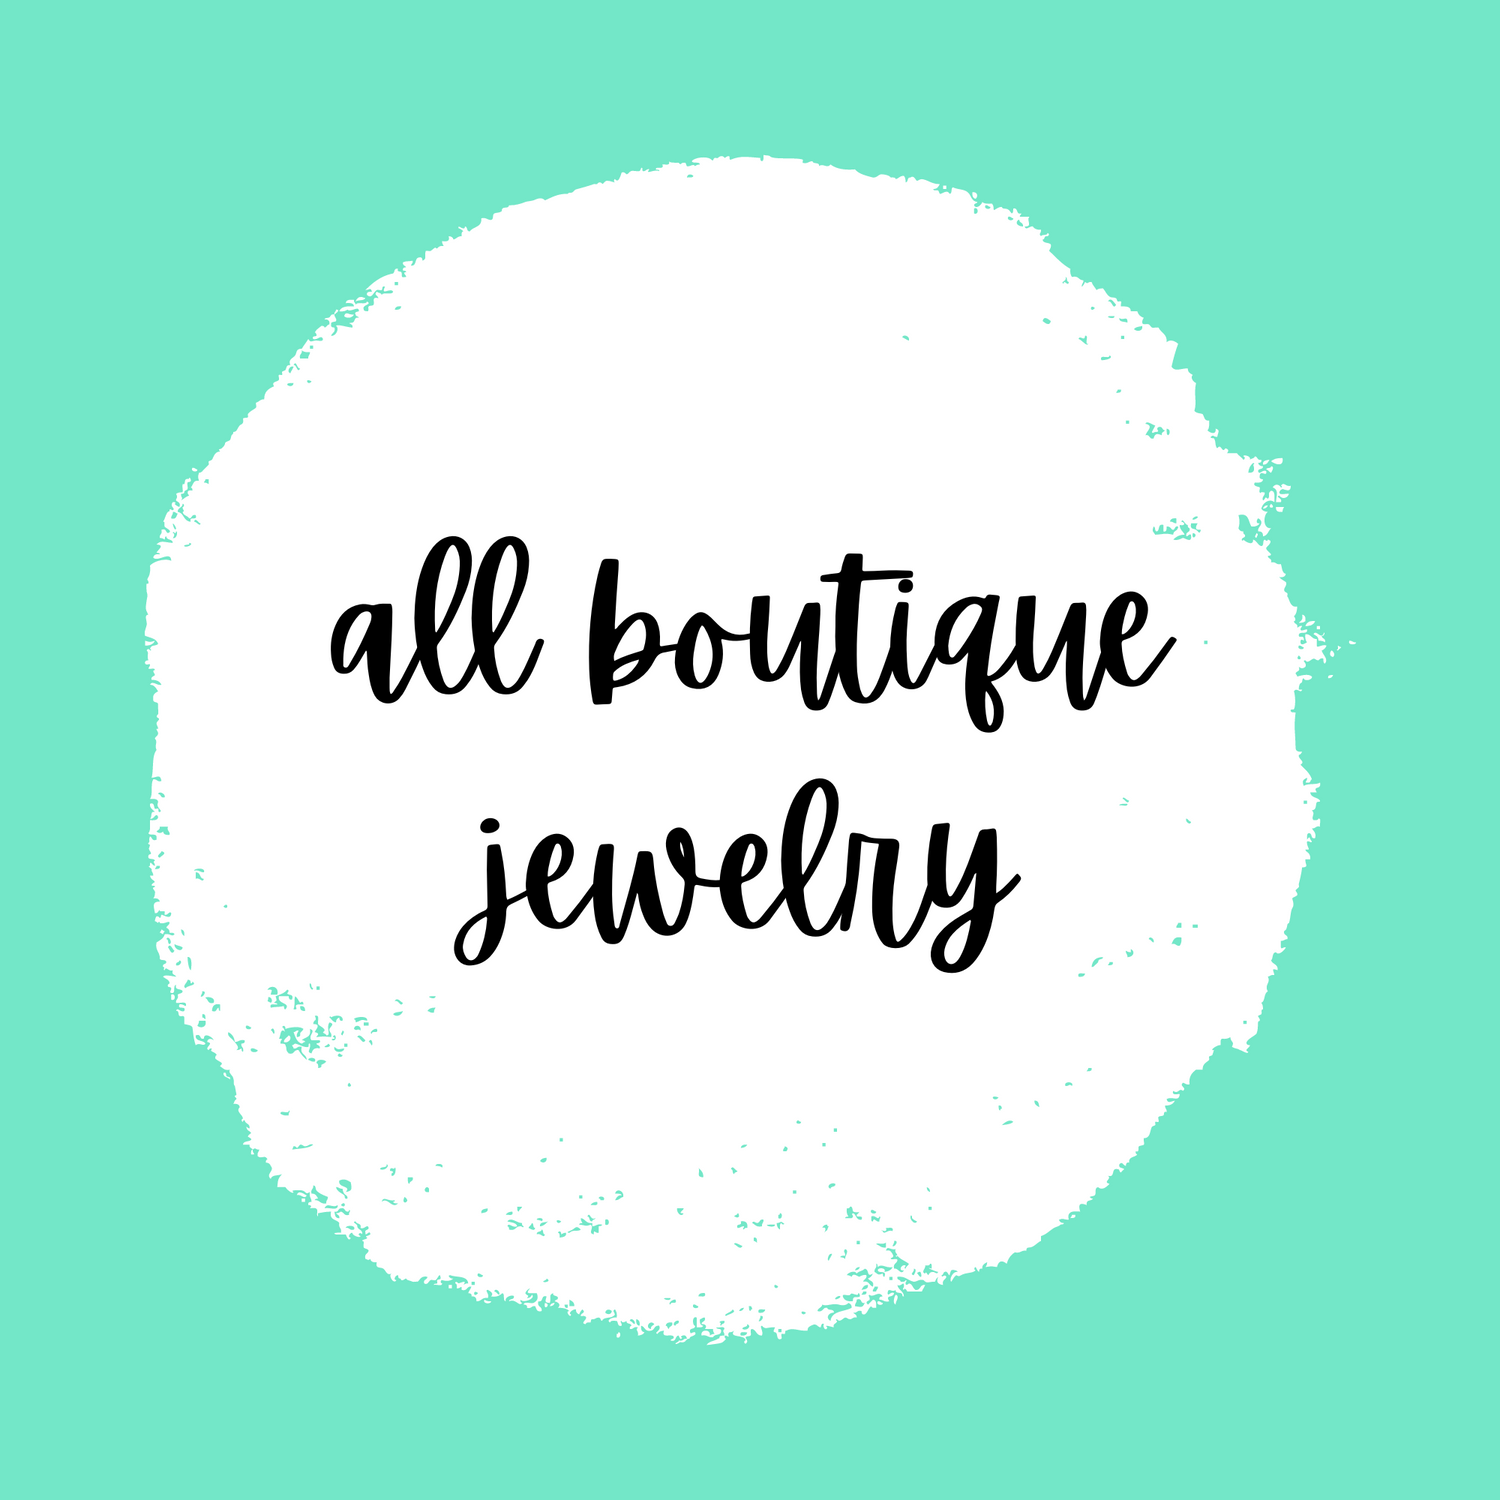 All Boutique Jewelry